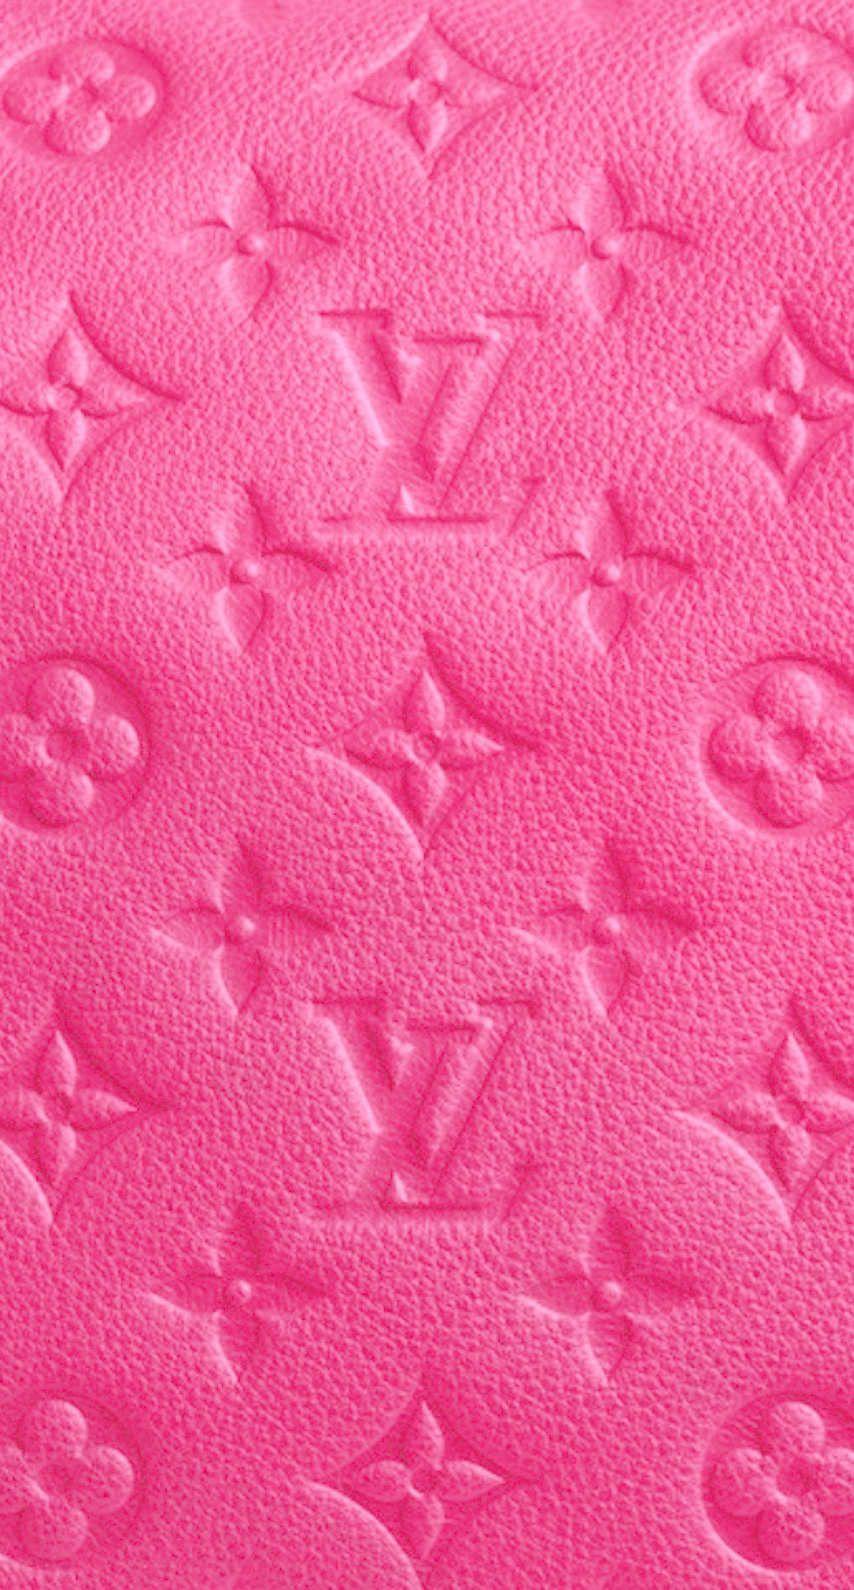 Louis Vuitton Pink Wallpapers - Top Free Louis Vuitton Pink Backgrounds ...